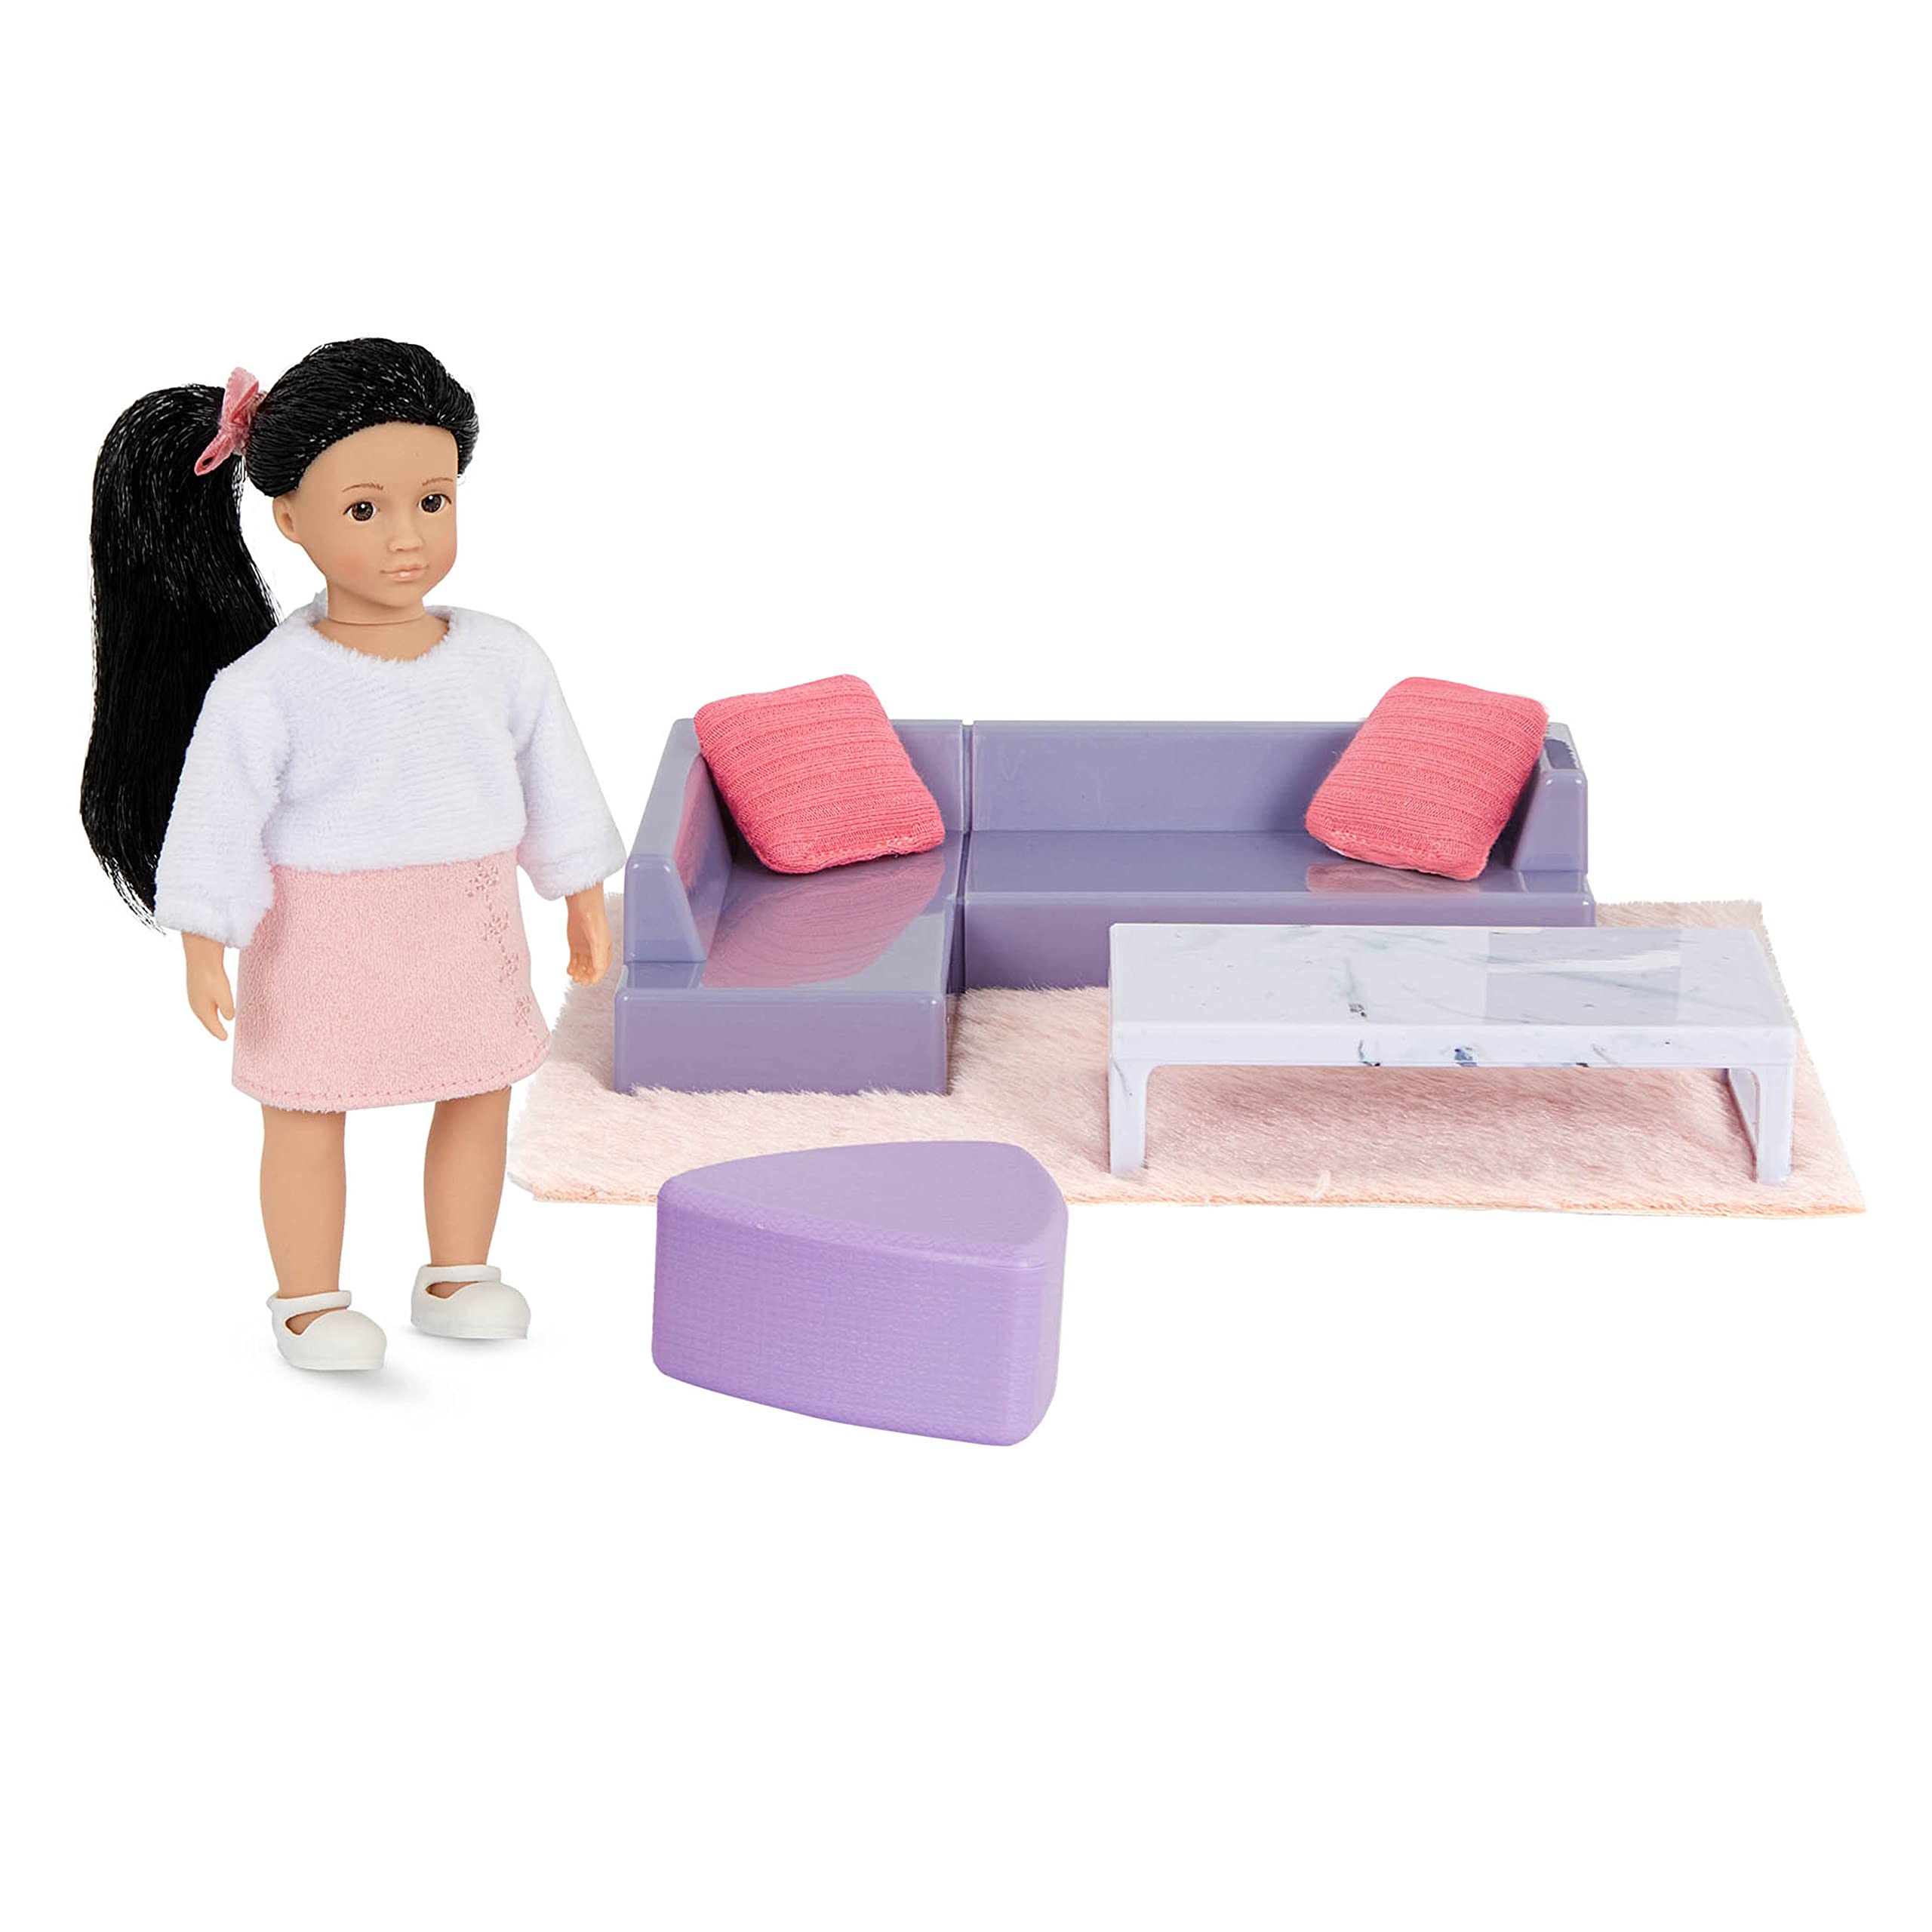 Lori Dolls – Yuni’s Cozy Sofa Set – Mini Doll & Toy Living Room Furniture – 6-inch Doll & Dollhouse Accessories – Sofa, Pouffe, Table, Rug, Pillows – Play Set for Kids – 3 Years +